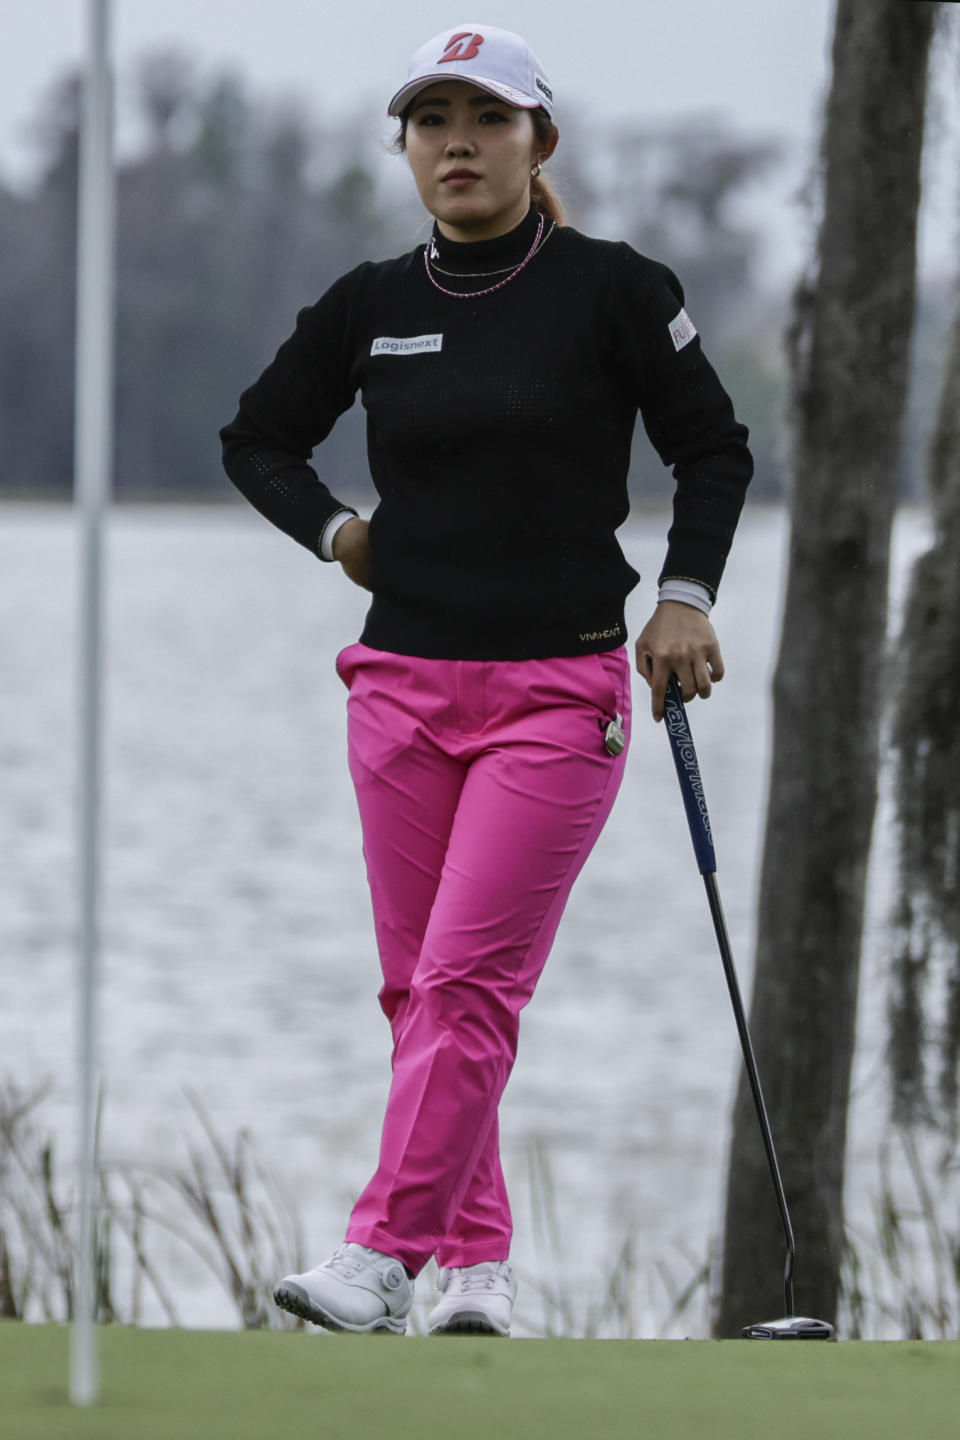 Ayaka Furue waits to putt on the 18th green during the first round of the Hilton Grand Vacations Tournament of Champions LPGA golf tournament in Orlando, Fla., Thursday, Jan. 18, 2024. (AP Photo/Kevin Kolczynski)